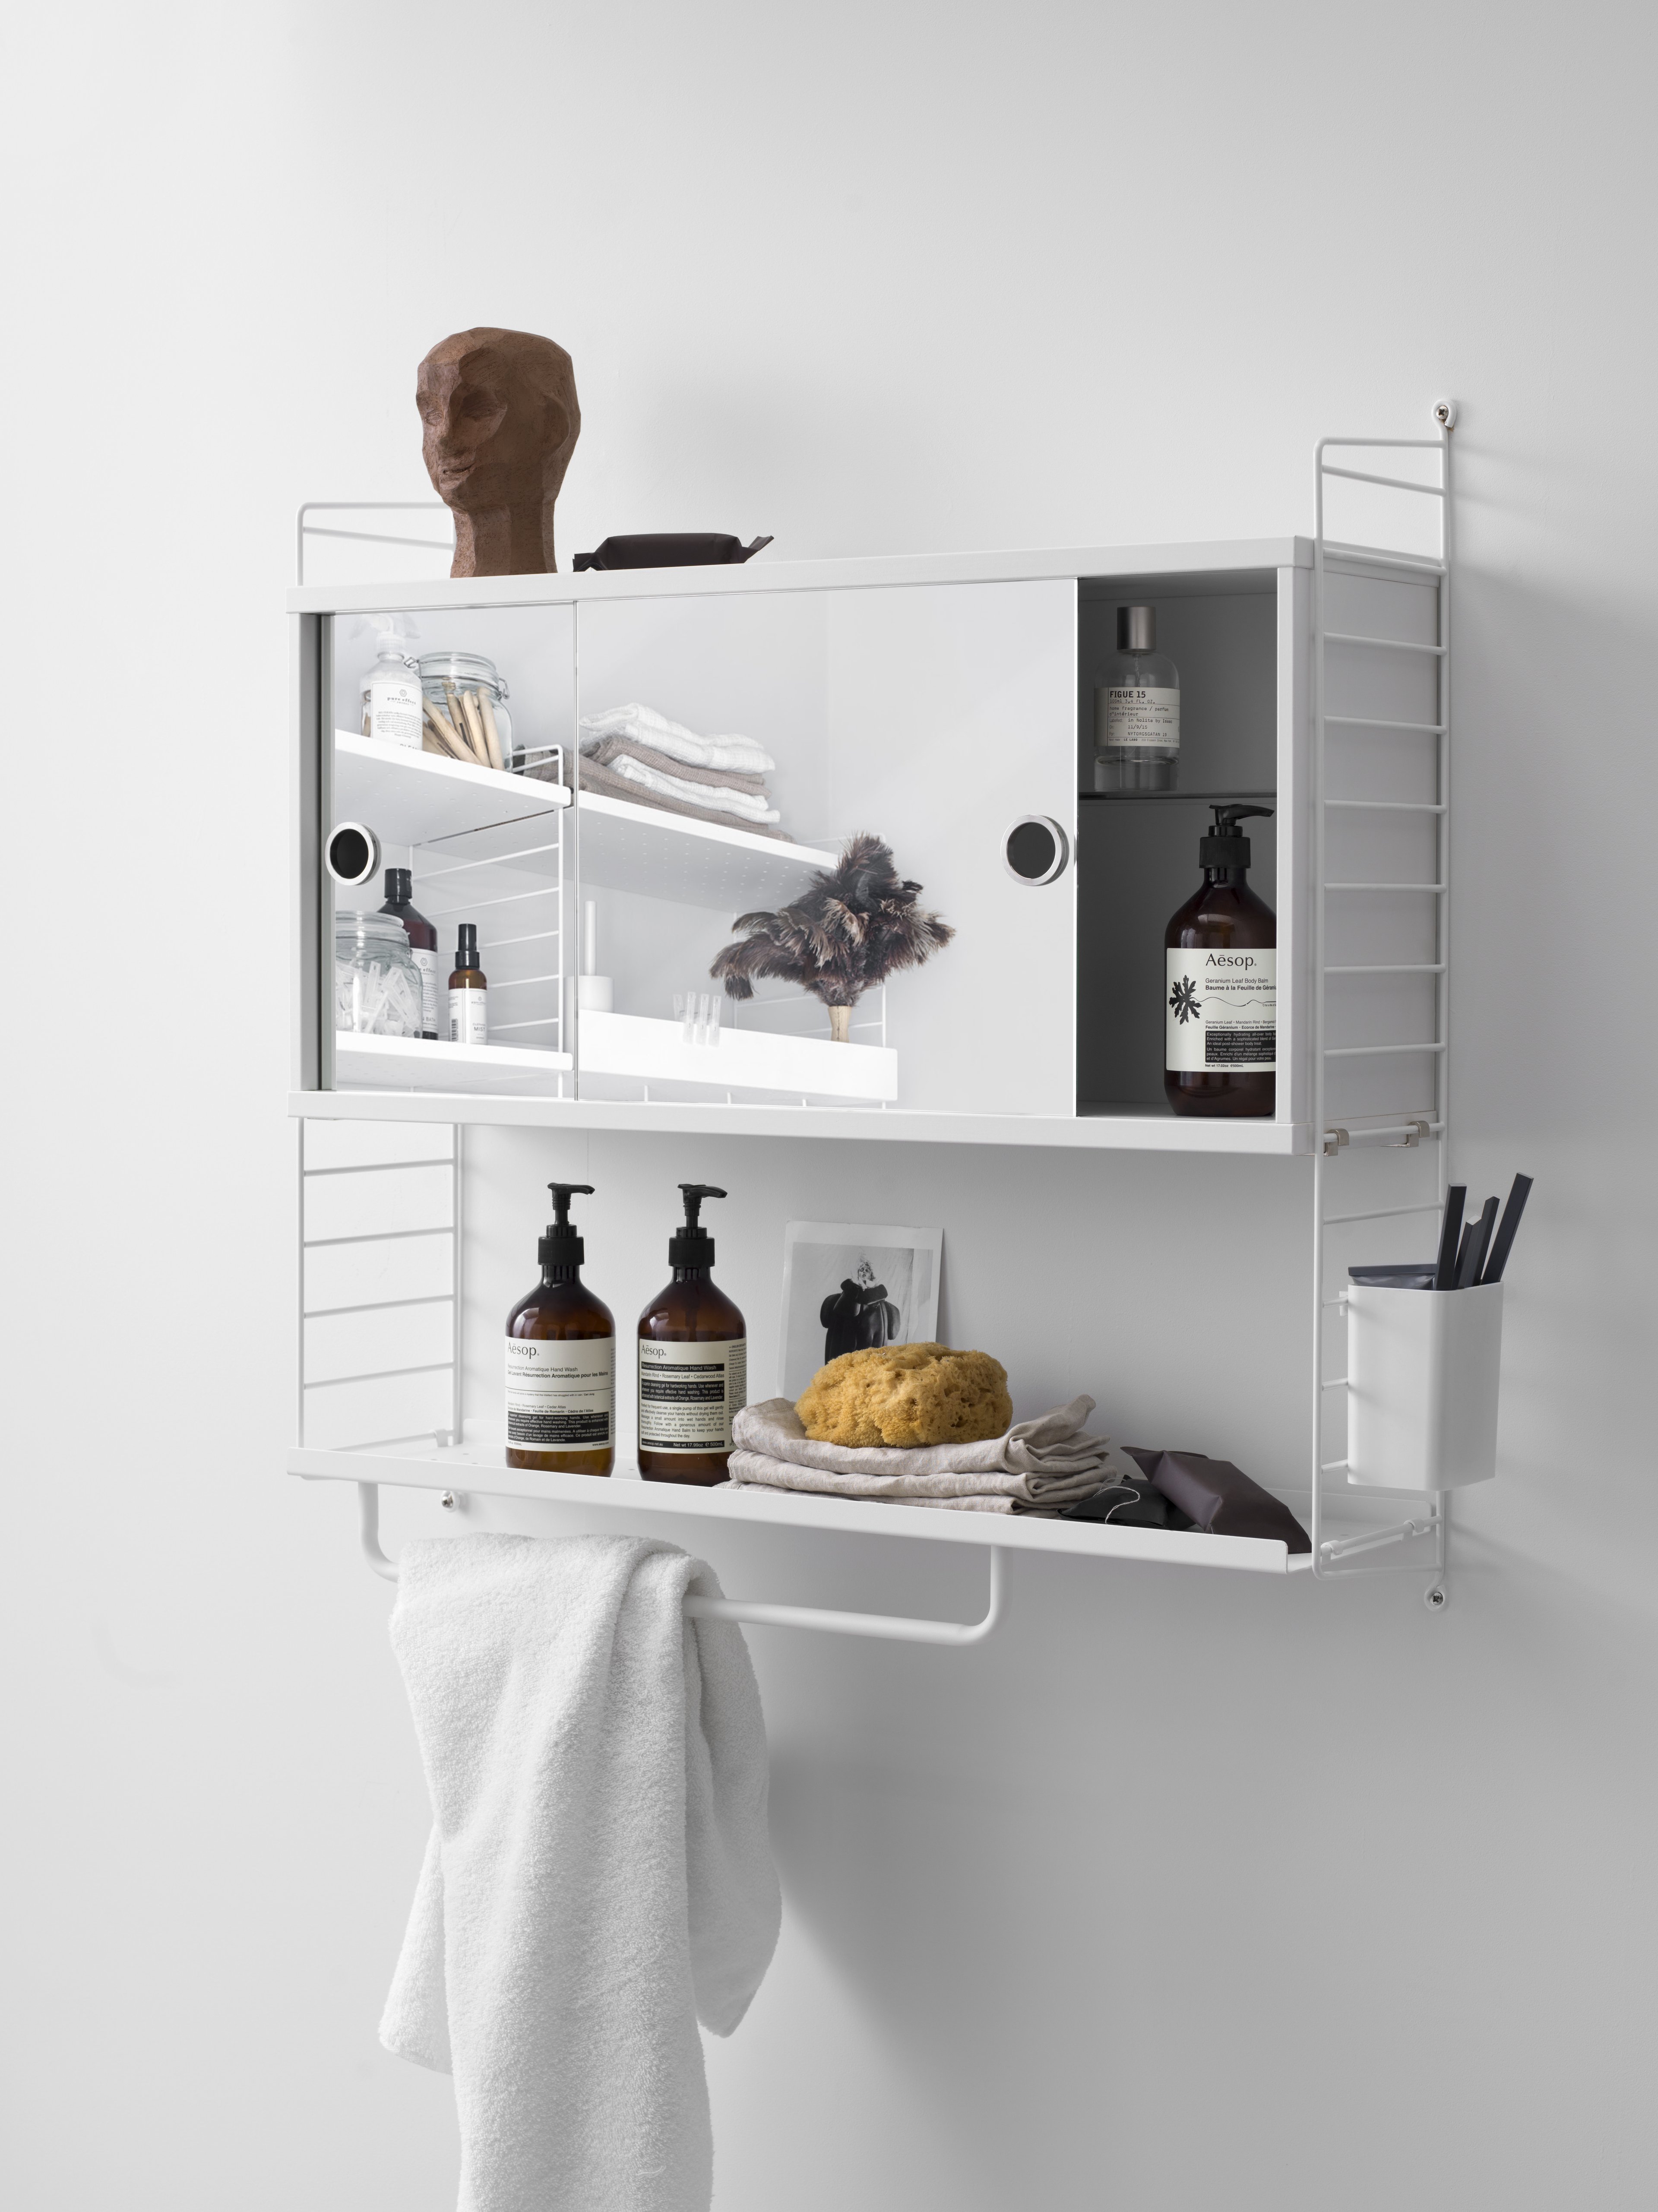 Wall mounted bathroom solution from String. Wall panels in white, cabinet with two mirror doors, metal shelf with low edge in white, rods in white and organizers in white.